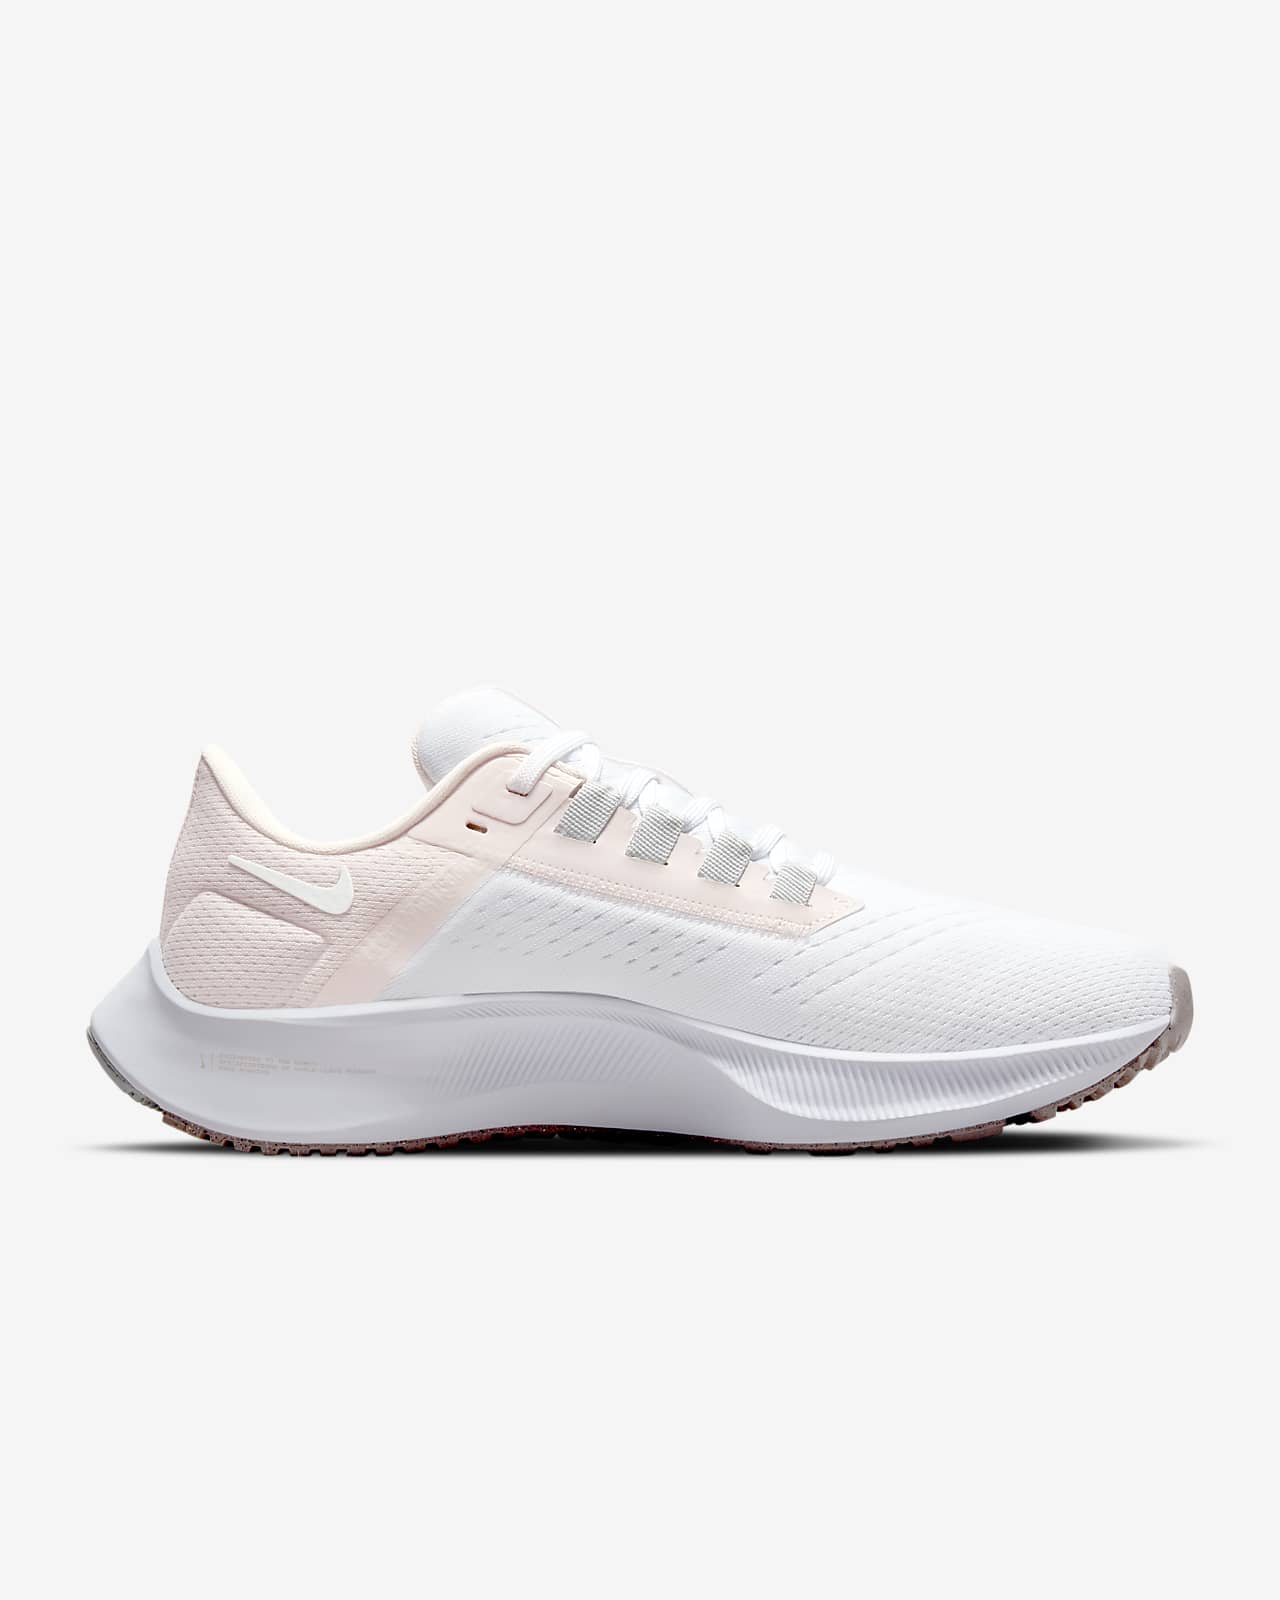 nike white shoes womens price philippines